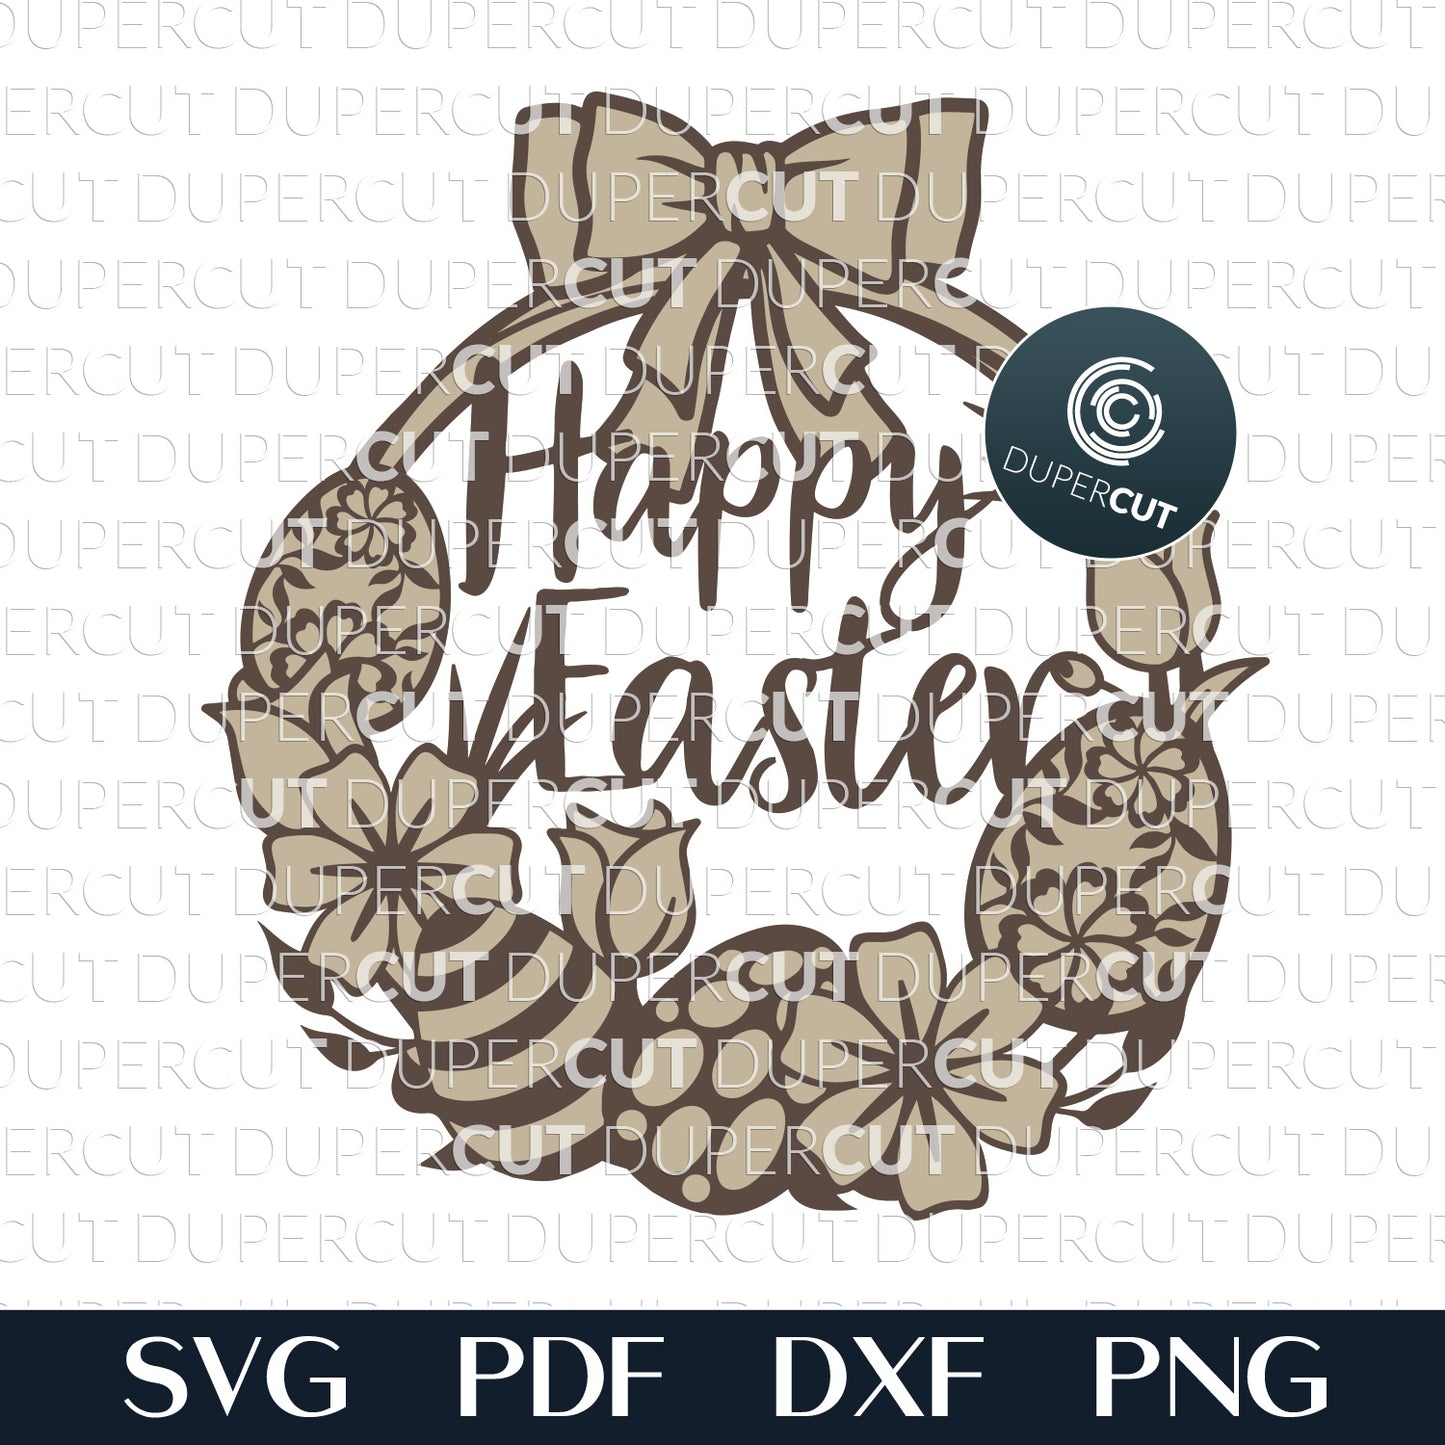 Happy Easter door hanger wreath - SVG DXF vector layered files for Glowforge, Cricut, Silhouette Cameo, CNC plasma machines, scroll saw pattern by www.dupercut.com